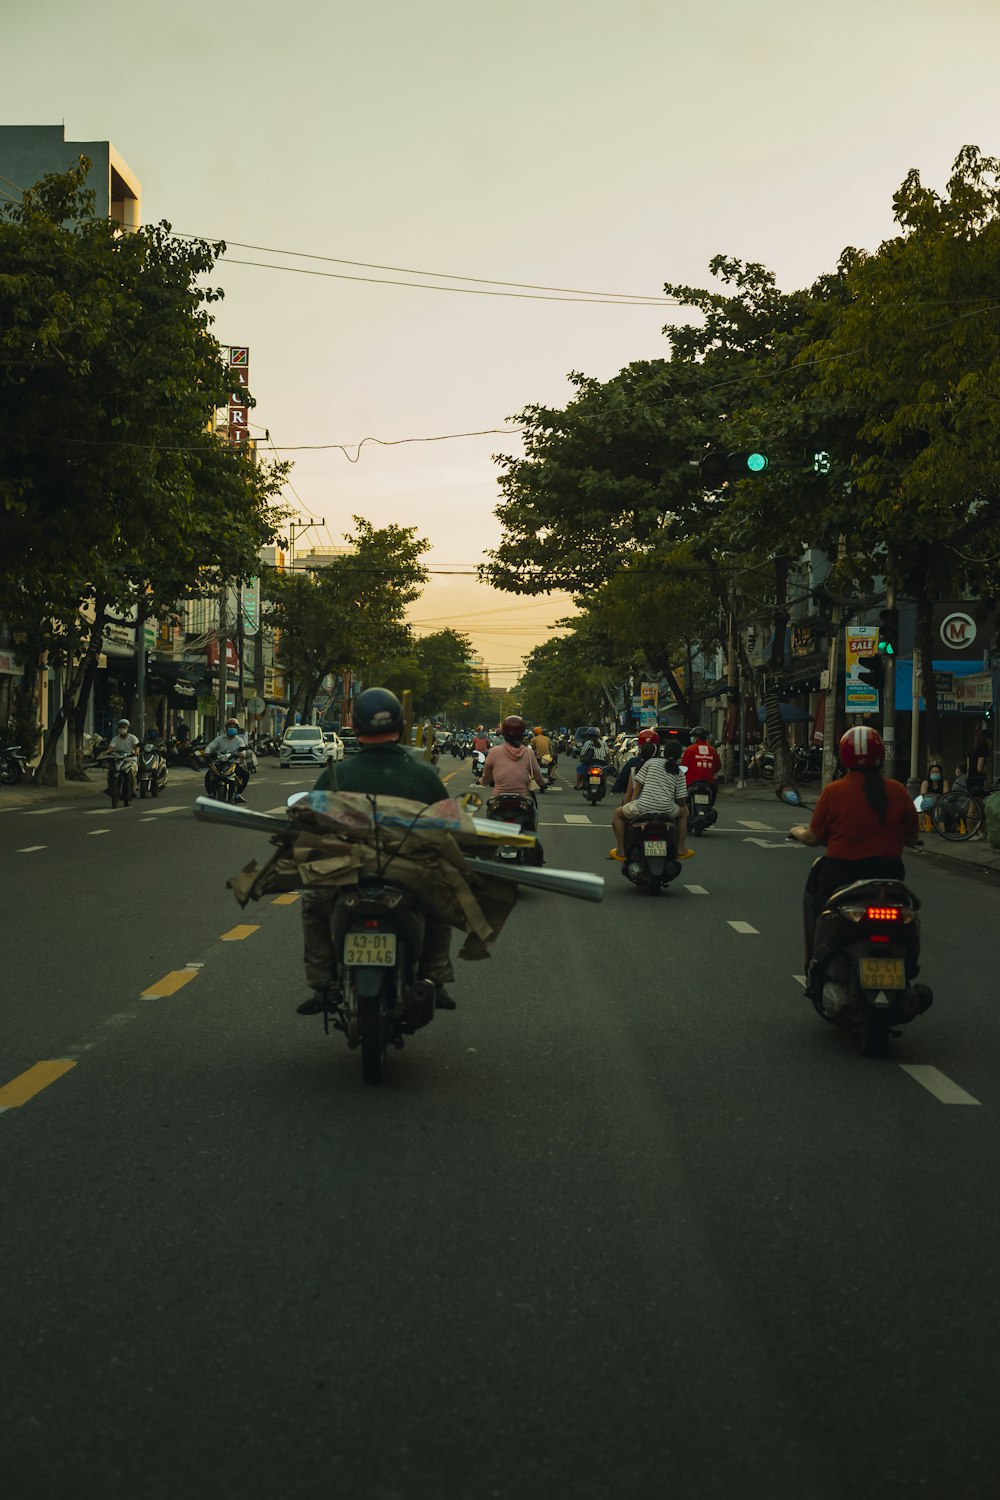 a group of people riding motorcycles down a street